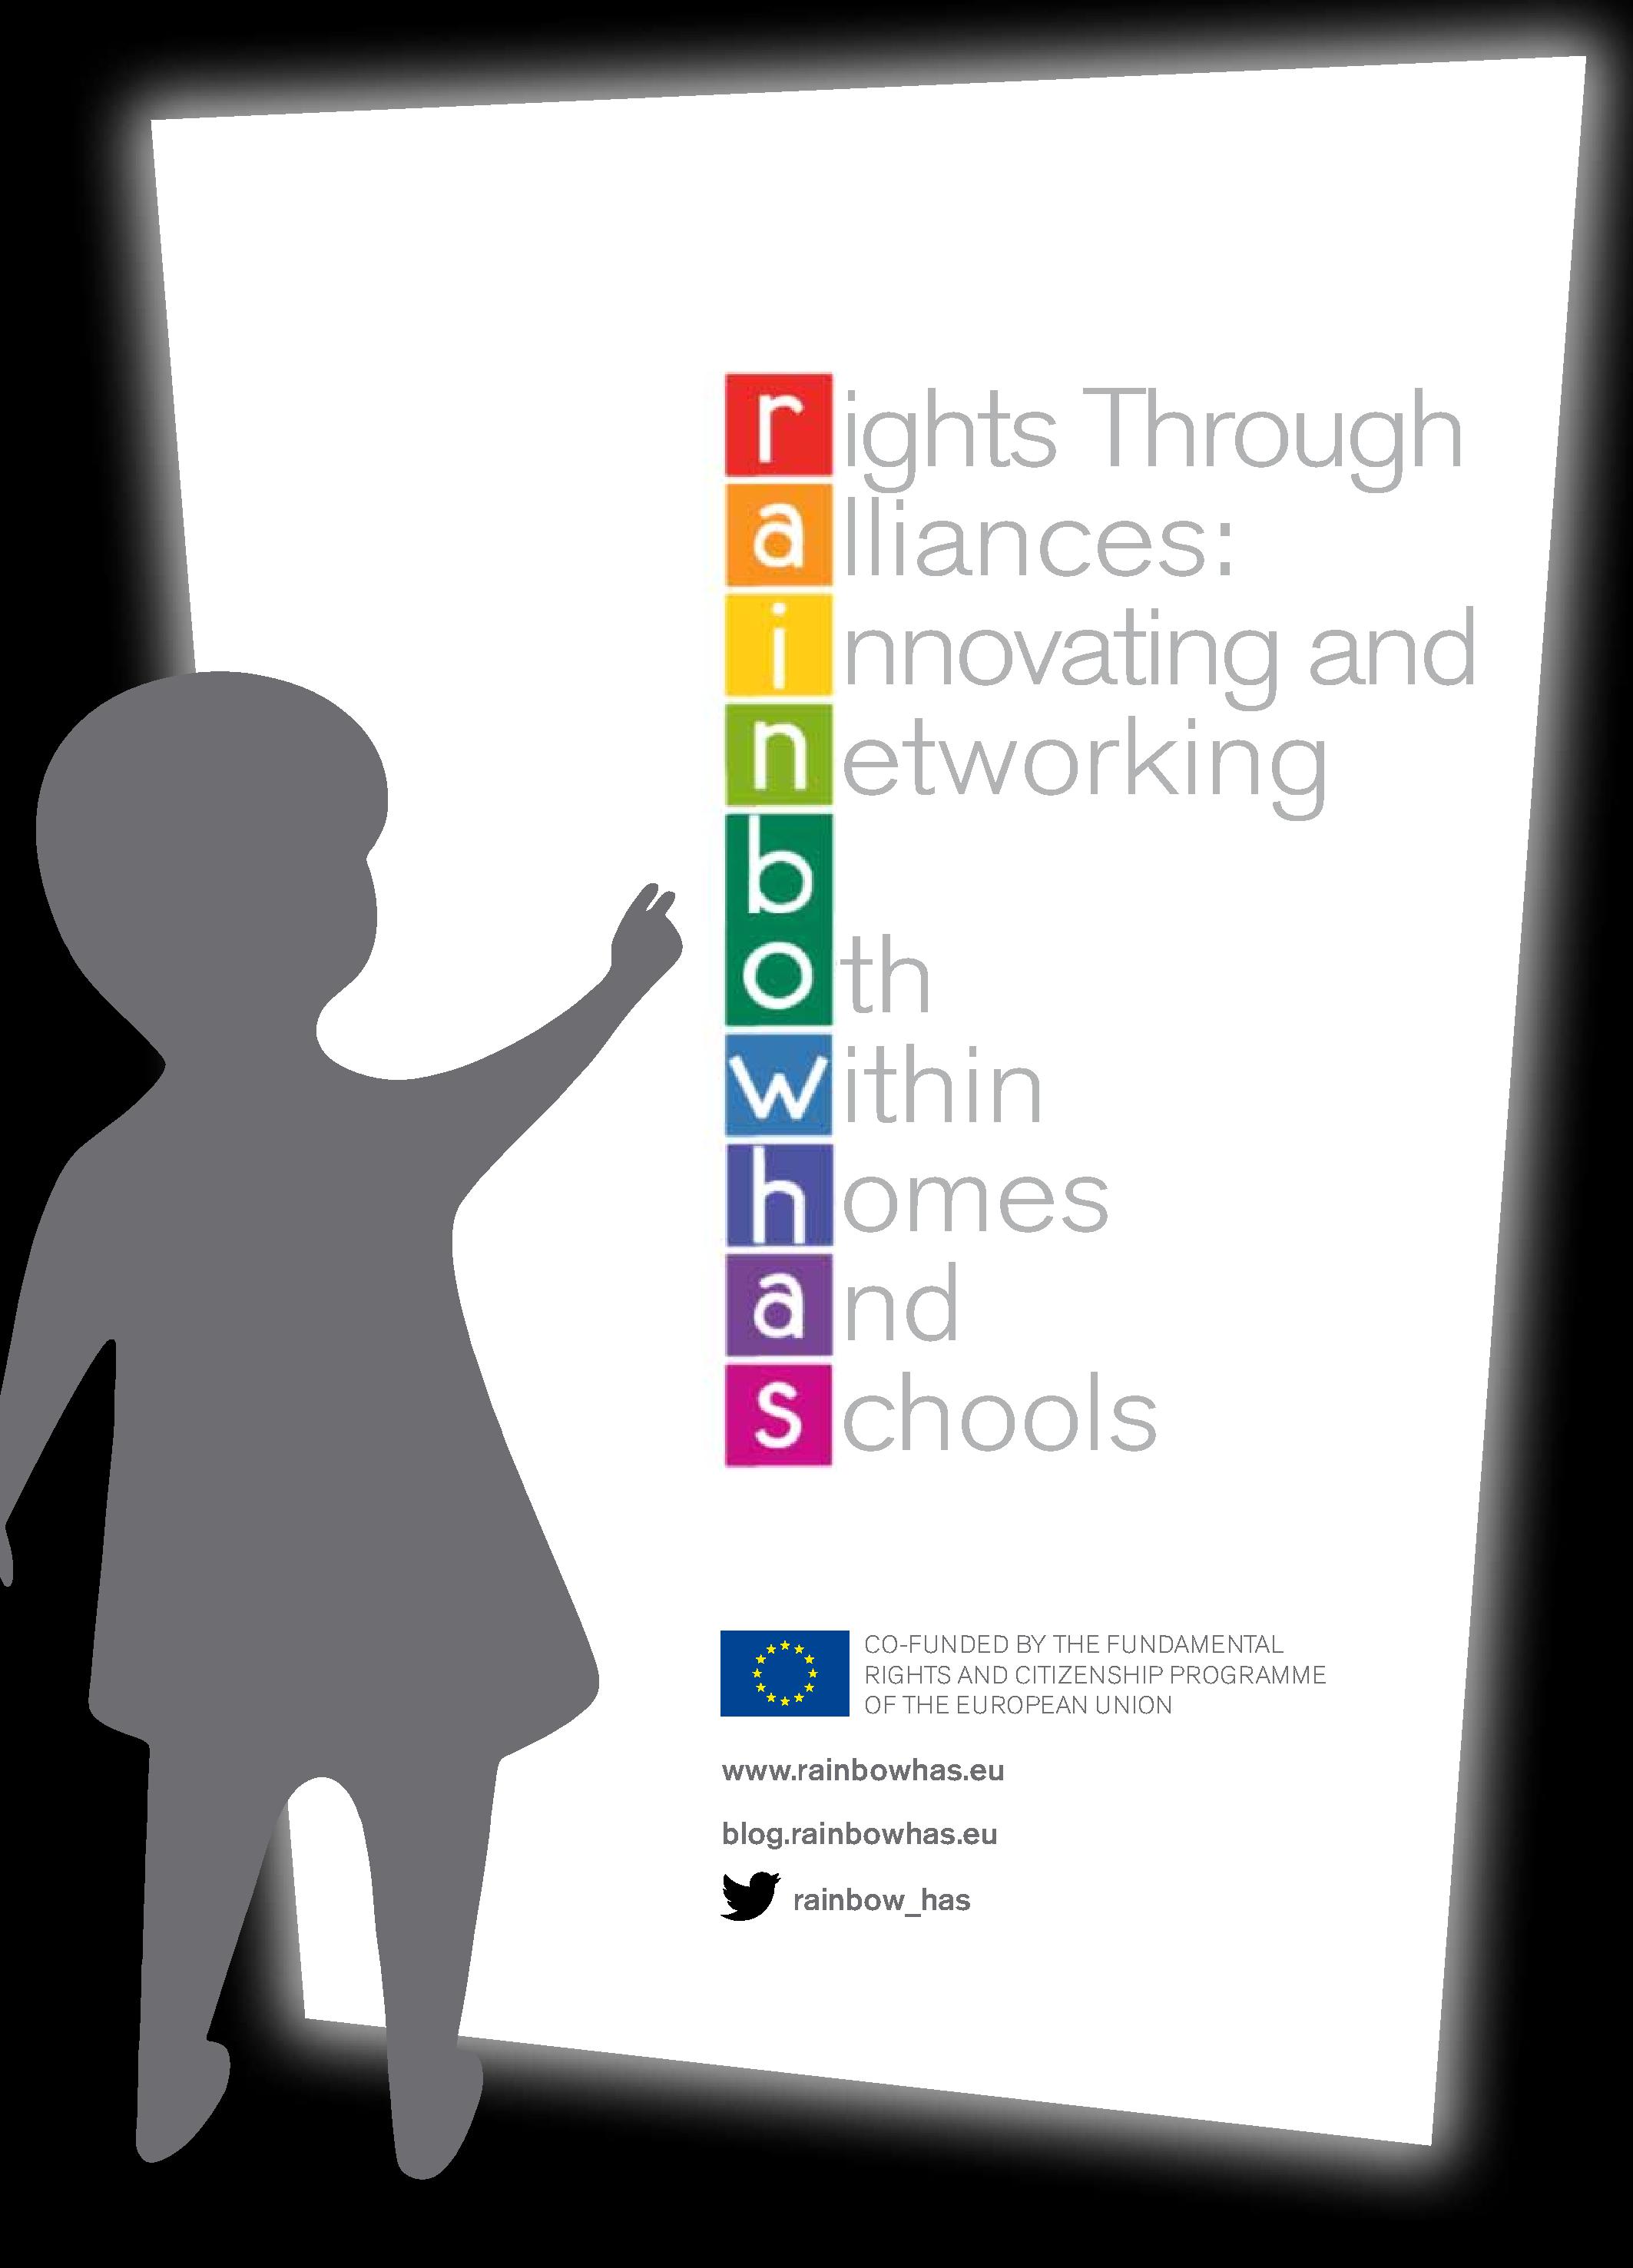 RainbowHas: Rights Through Alliances: Innovating and Networking both Within Homes nd Schools